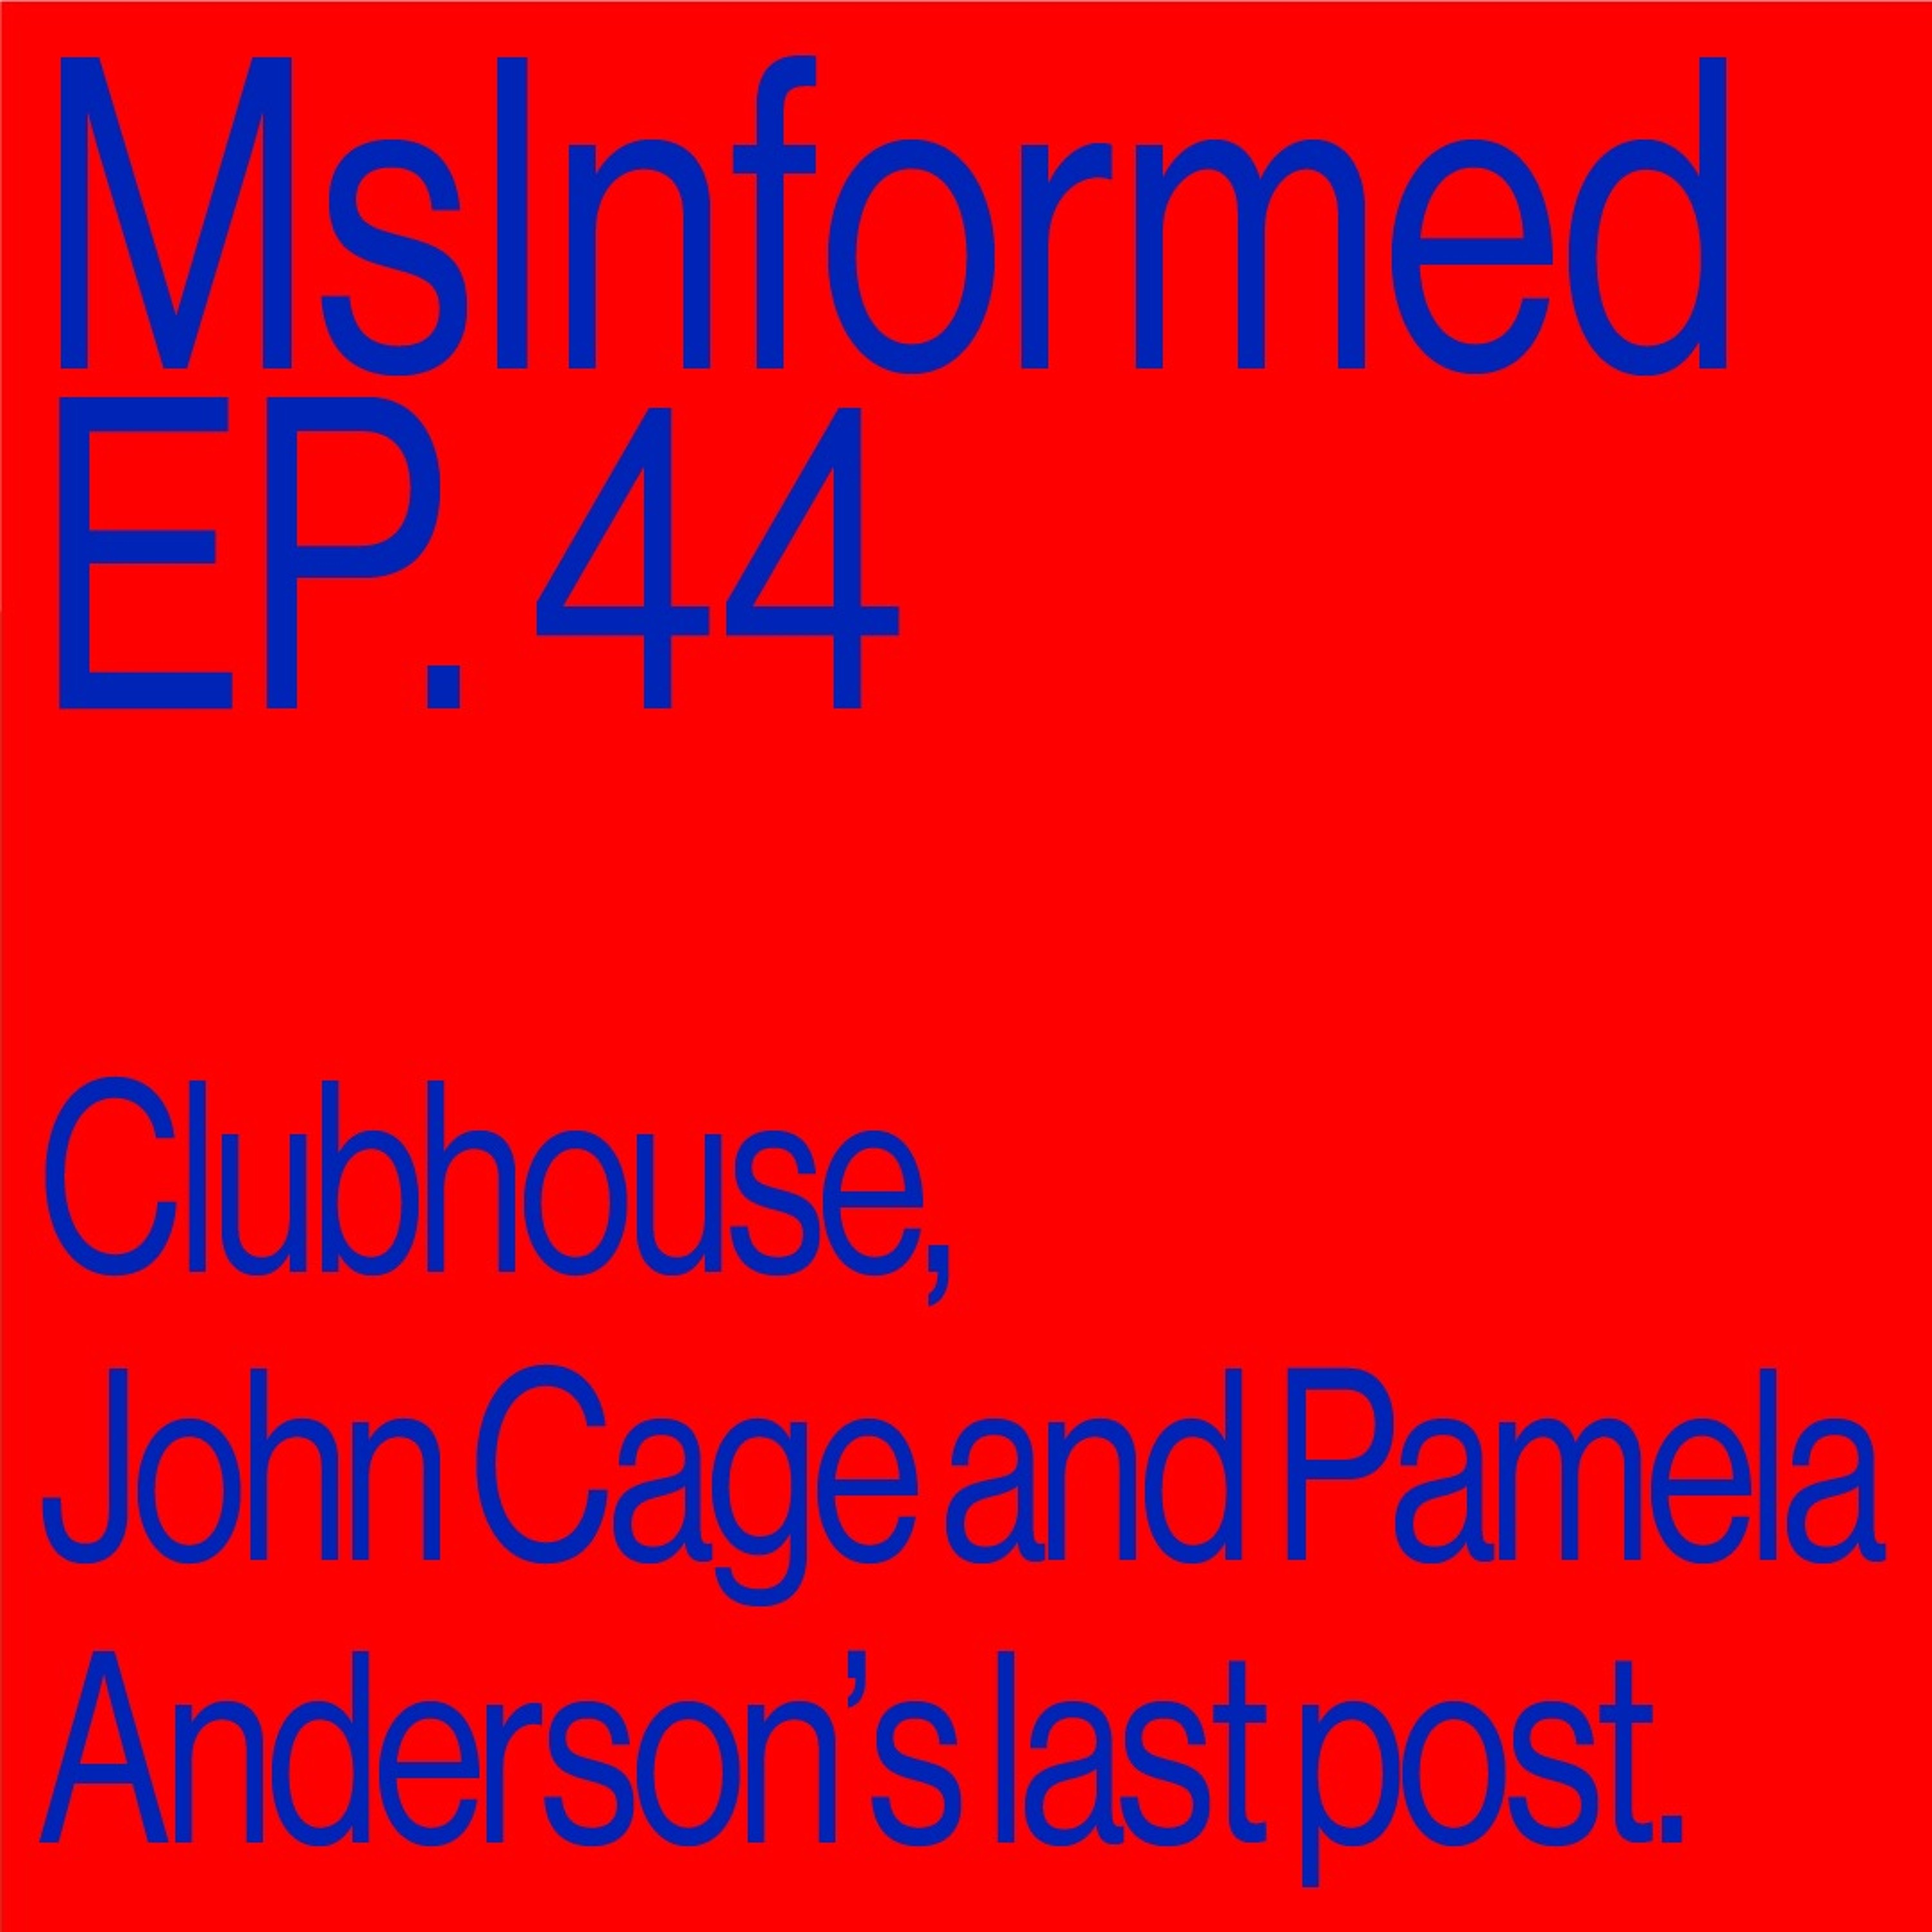 Episode 44: Clubhouse, John Cage, and Pamela Anderson's last post